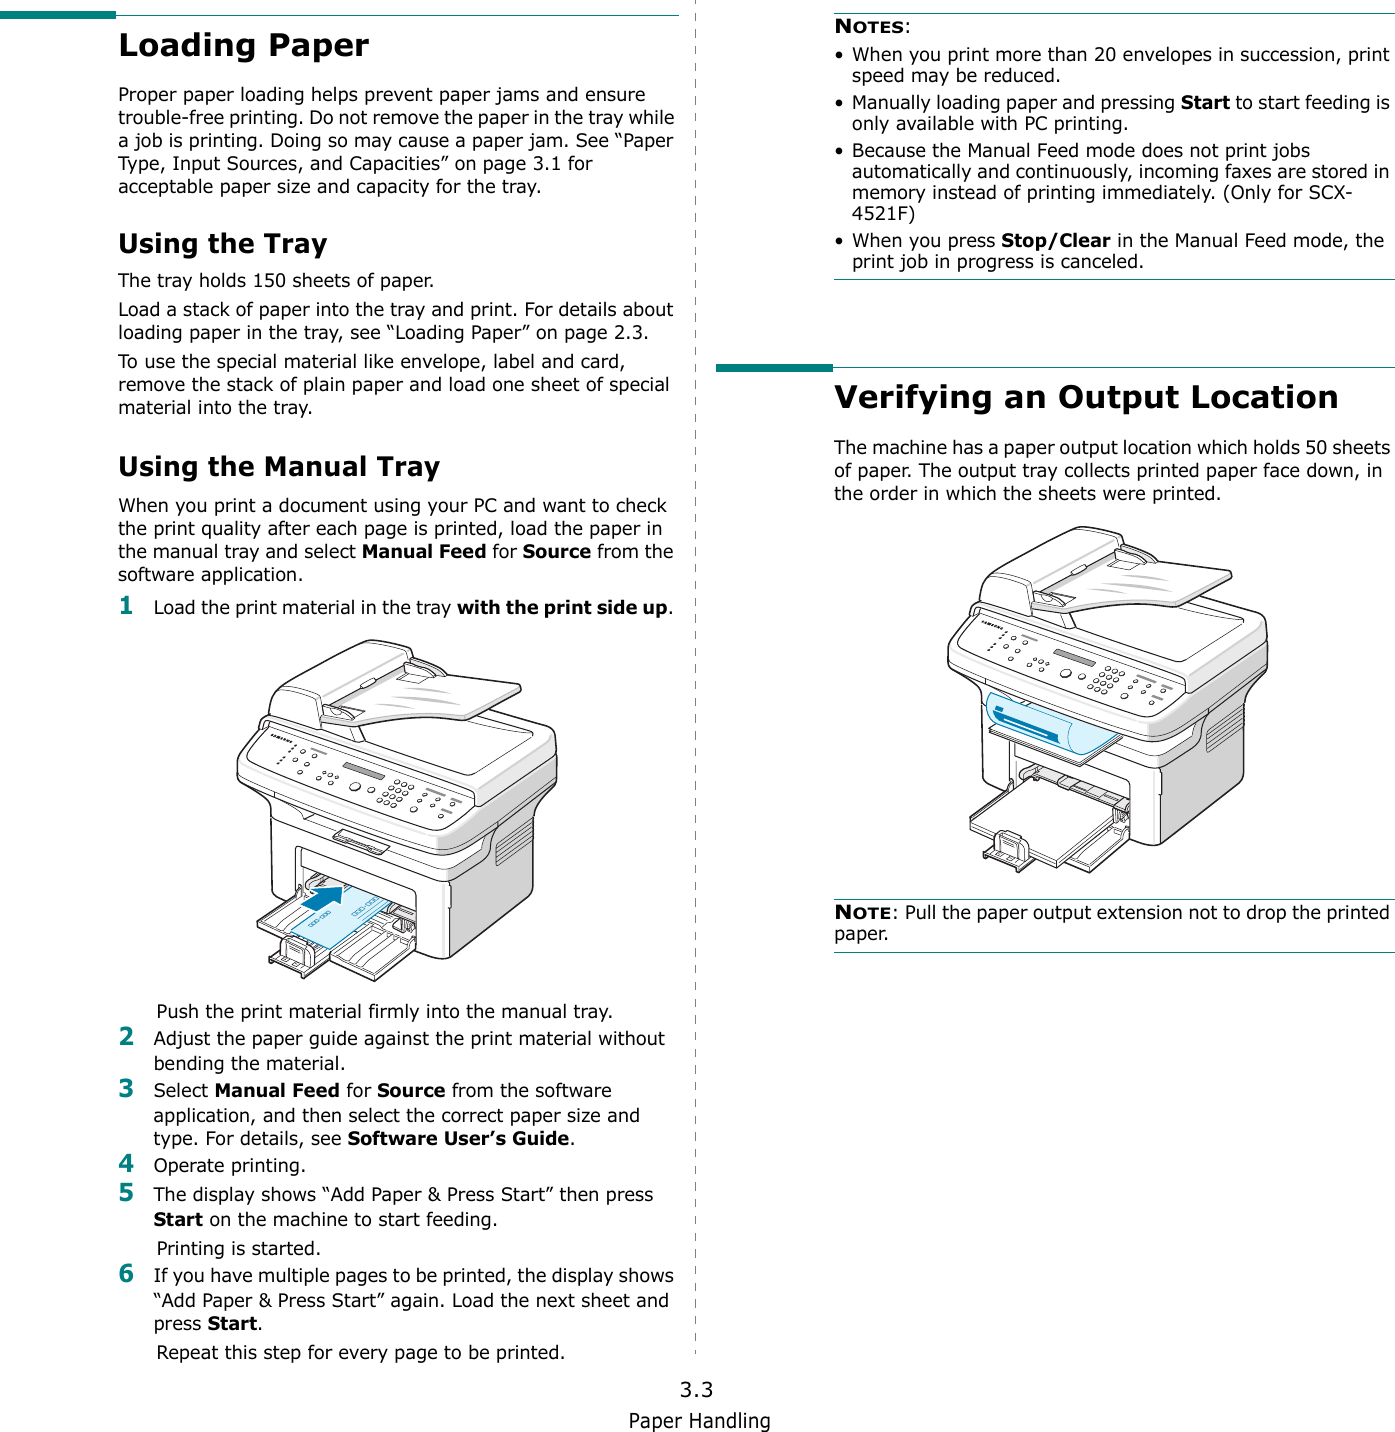 Paper Handling3.3Loading PaperProper paper loading helps prevent paper jams and ensure trouble-free printing. Do not remove the paper in the tray while a job is printing. Doing so may cause a paper jam. See “Paper Type, Input Sources, and Capacities” on page 3.1 for acceptable paper size and capacity for the tray. Using the TrayThe tray holds 150 sheets of paper.Load a stack of paper into the tray and print. For details about loading paper in the tray, see “Loading Paper” on page 2.3. To use the special material like envelope, label and card, remove the stack of plain paper and load one sheet of special material into the tray. Using the Manual TrayWhen you print a document using your PC and want to check the print quality after each page is printed, load the paper in the manual tray and select Manual Feed for Source from the software application.1Load the print material in the tray with the print side up. Push the print material firmly into the manual tray.2Adjust the paper guide against the print material without bending the material.3Select Manual Feed for Source from the software application, and then select the correct paper size and type. For details, see Software User’s Guide.4Operate printing.5The display shows “Add Paper &amp; Press Start” then press Start on the machine to start feeding.Printing is started. 6If you have multiple pages to be printed, the display shows “Add Paper &amp; Press Start” again. Load the next sheet and press Start. Repeat this step for every page to be printed. NOTES: • When you print more than 20 envelopes in succession, print speed may be reduced.• Manually loading paper and pressing Start to start feeding is only available with PC printing.• Because the Manual Feed mode does not print jobs automatically and continuously, incoming faxes are stored in memory instead of printing immediately. (Only for SCX-4521F)• When you press Stop/Clear in the Manual Feed mode, the print job in progress is canceled. Verifying an Output LocationThe machine has a paper output location which holds 50 sheets of paper. The output tray collects printed paper face down, in the order in which the sheets were printed.NOTE: Pull the paper output extension not to drop the printed paper.